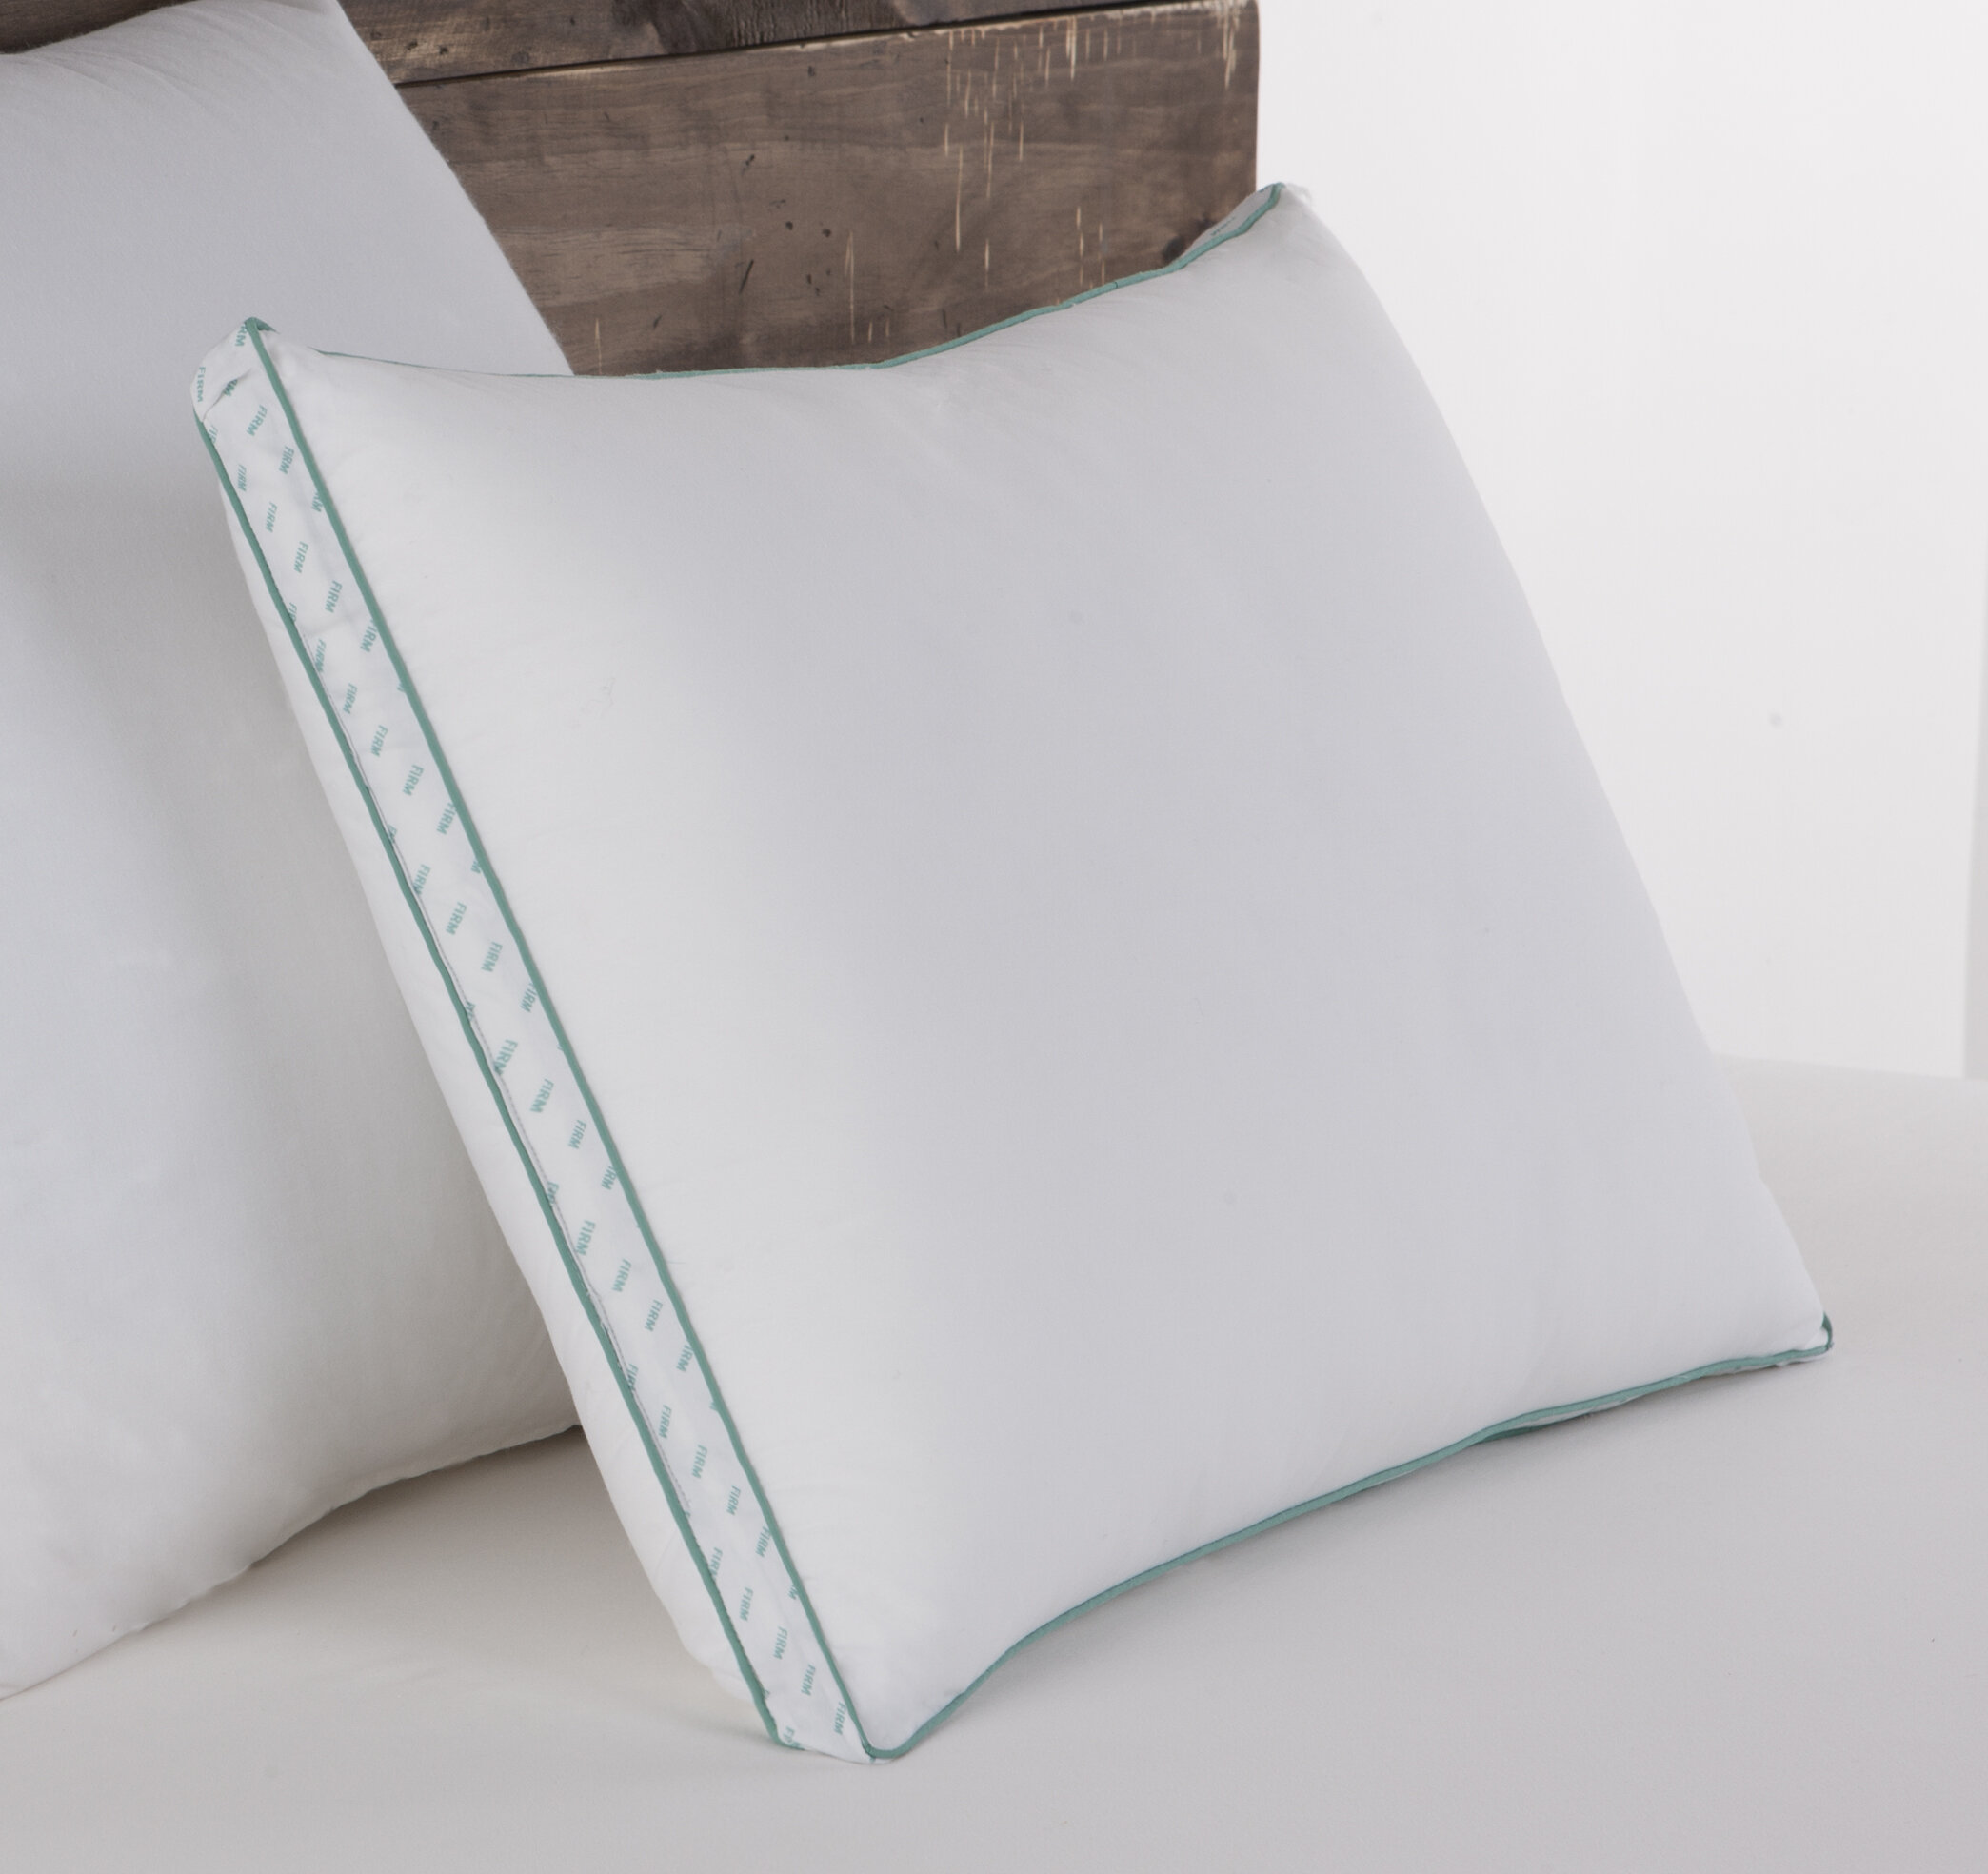 Details about   American Hotel Register Infinity Shape Memorelle Fill Pillow King Size 